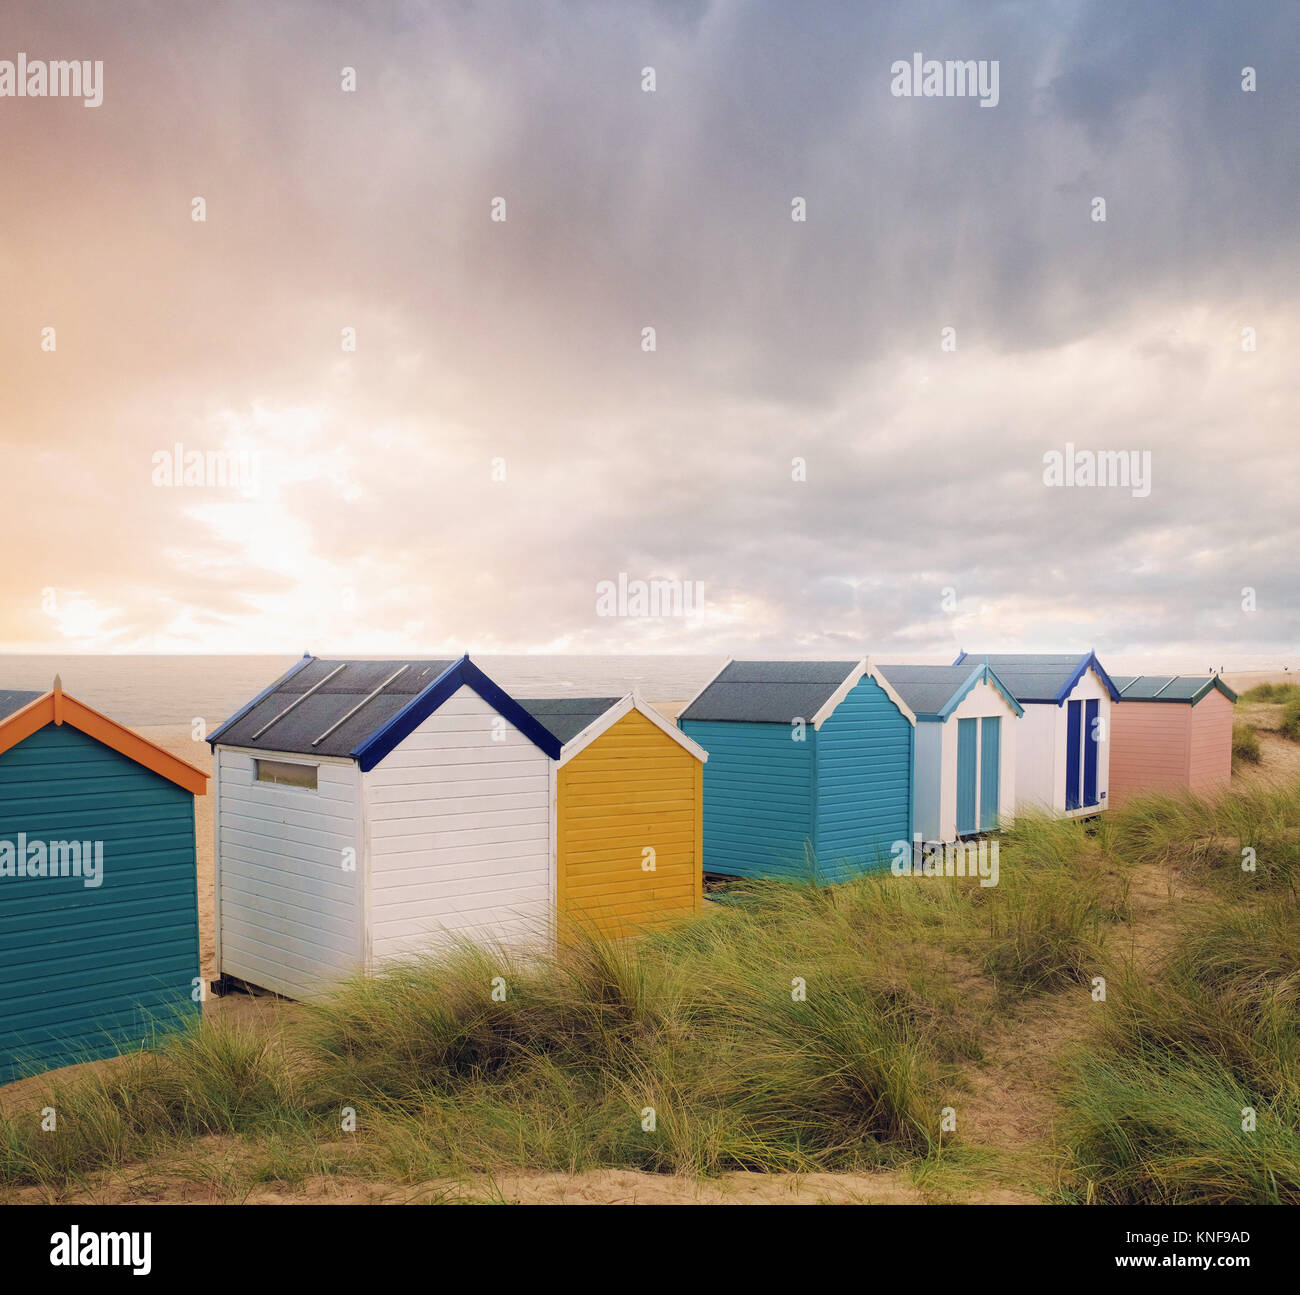 Row of colourful beach huts and storm clouds over sea, Southwold, Suffolk, England Stock Photo